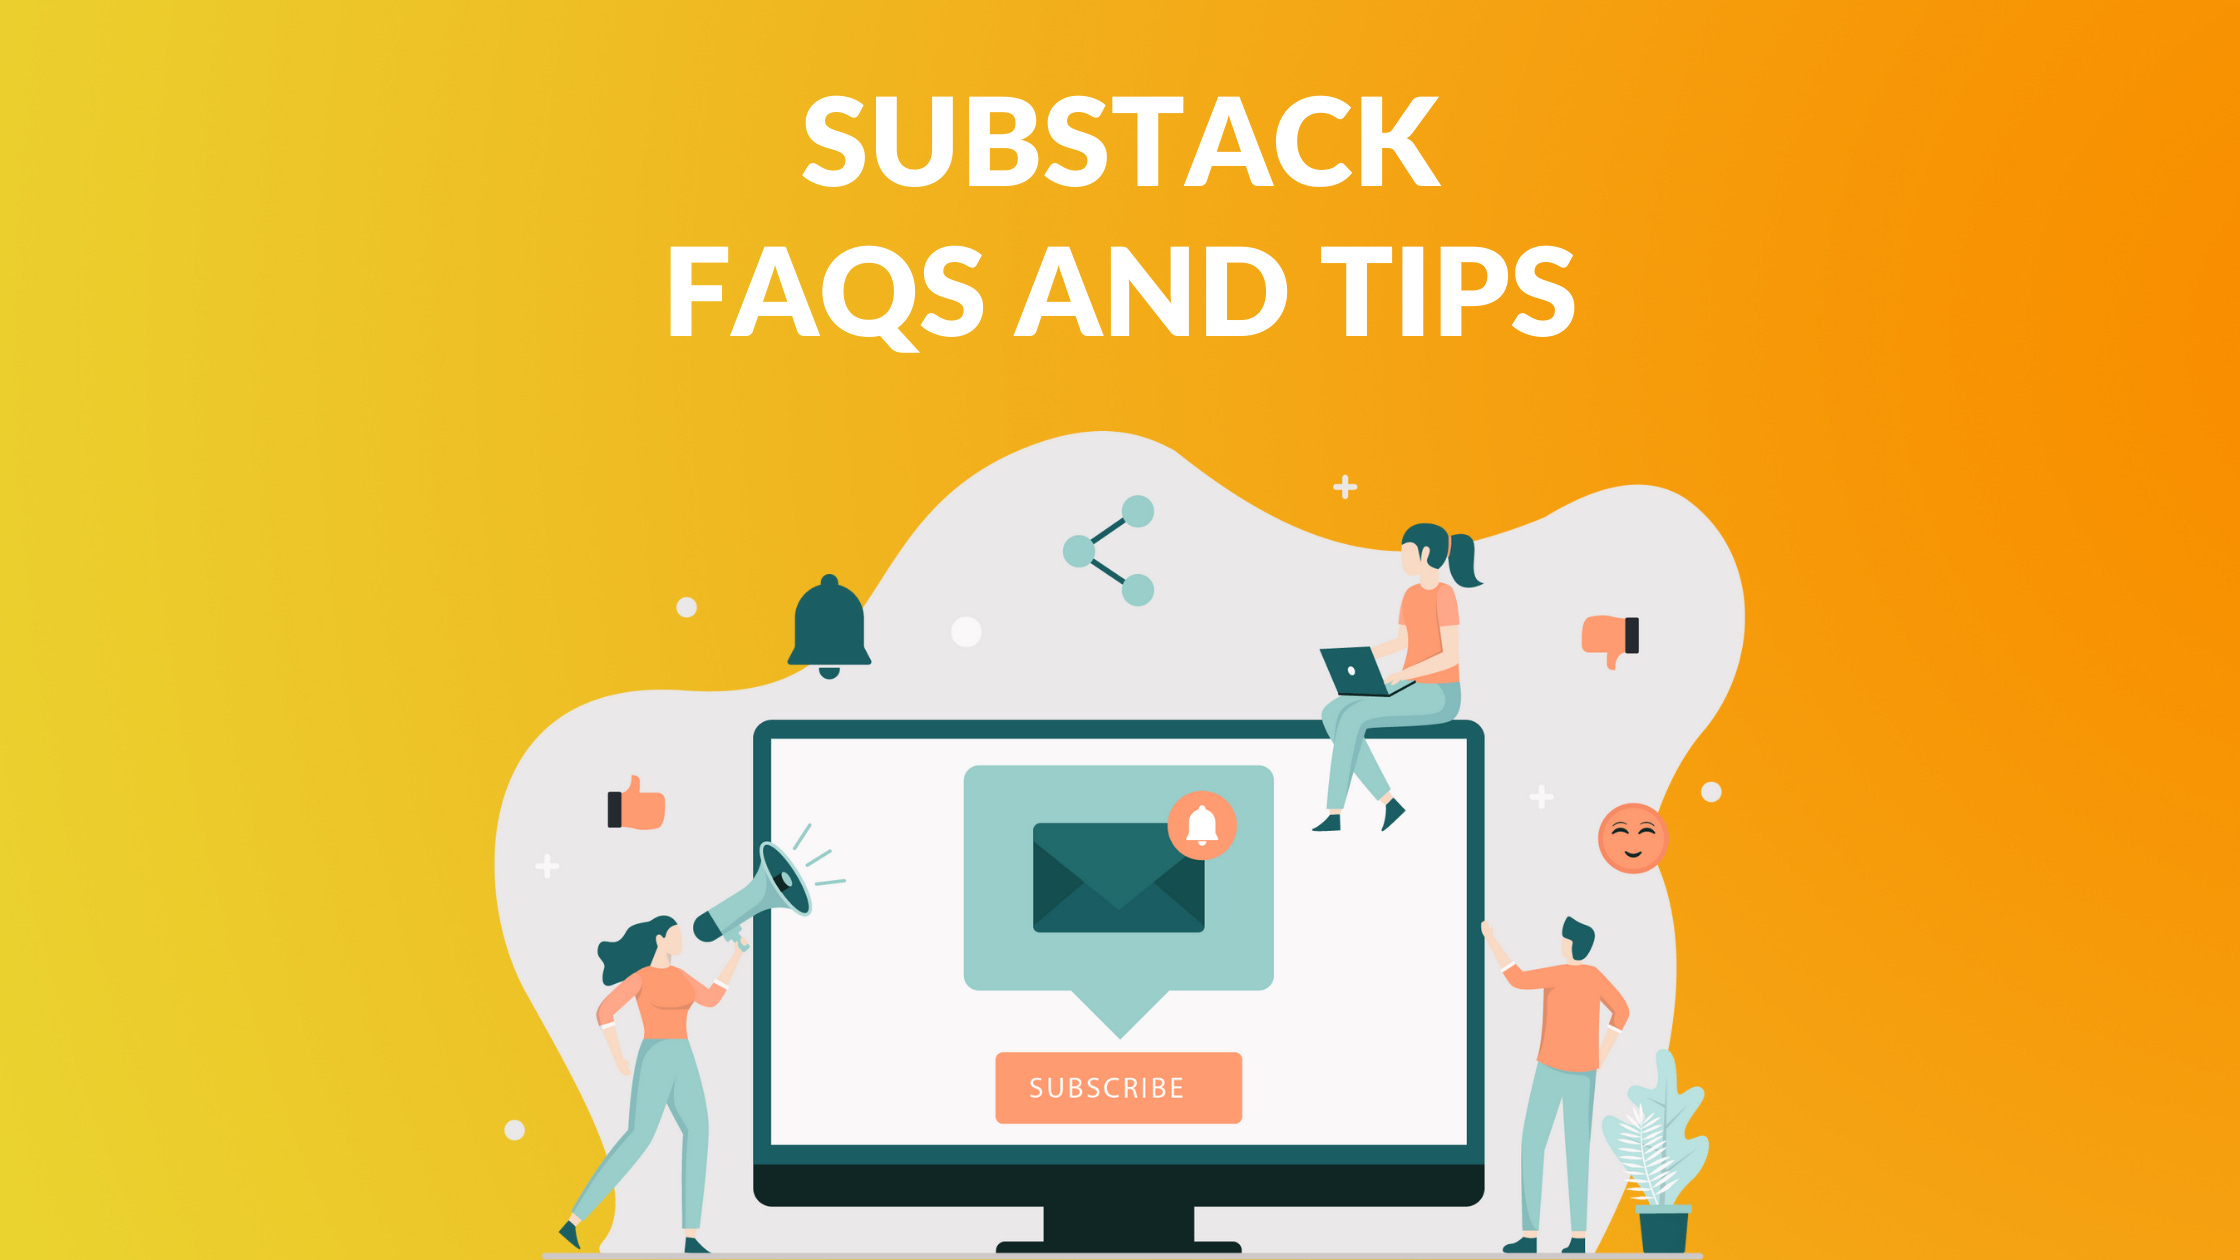 📖 Substack FAQs and Tips - by Casey Botticello